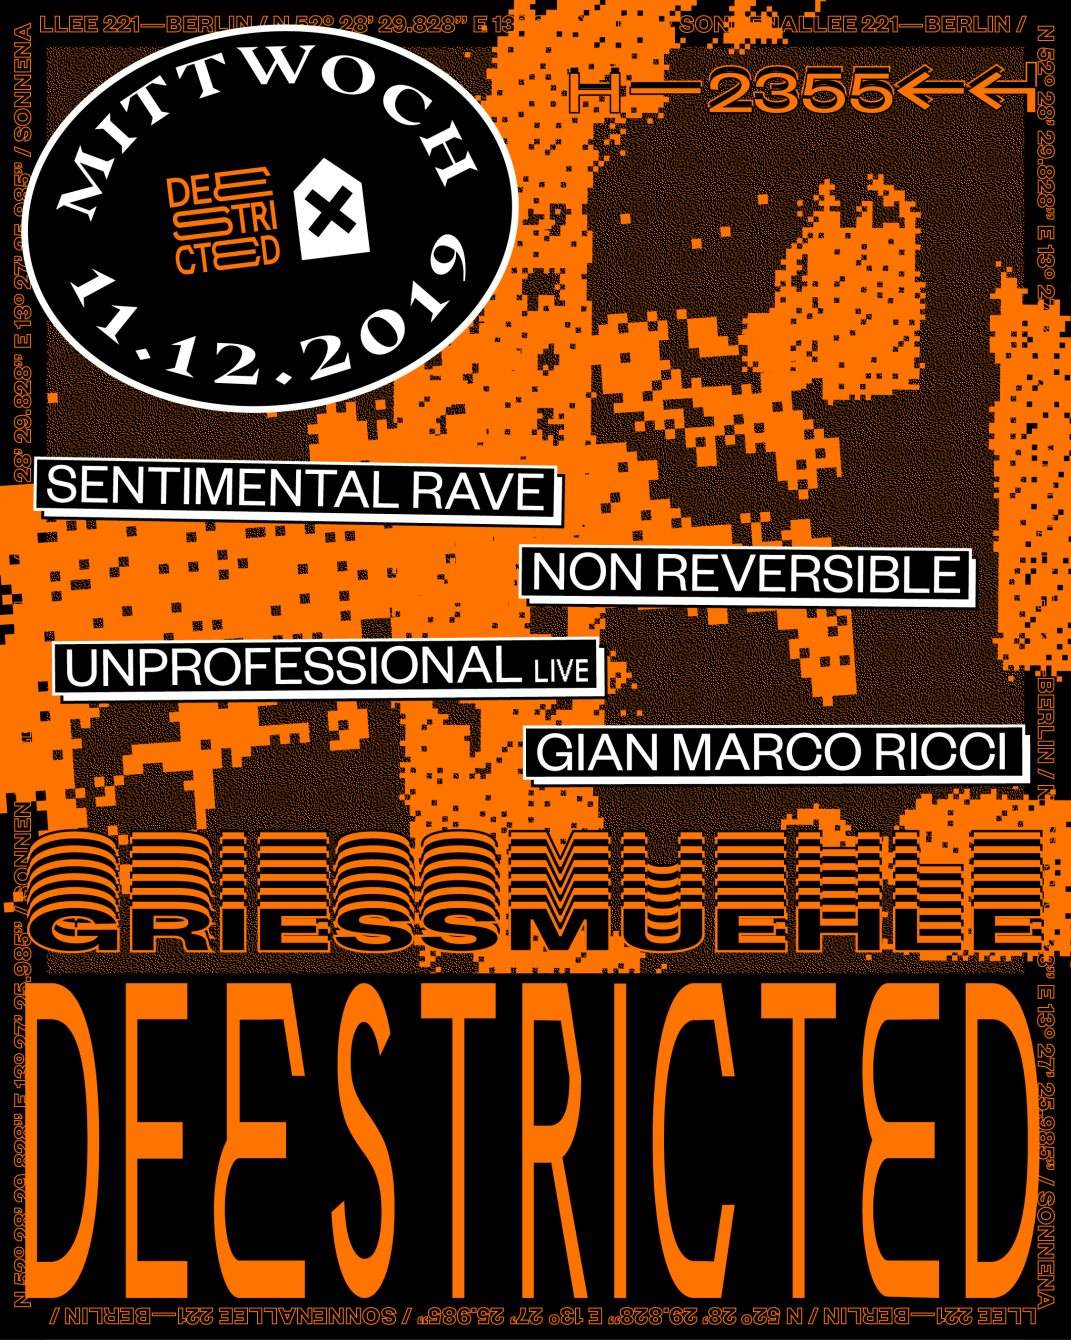 Deestricted with Sentimental Rave, Non Reversible, Unprofessional Live and Gian Marco Ricci - Página trasera